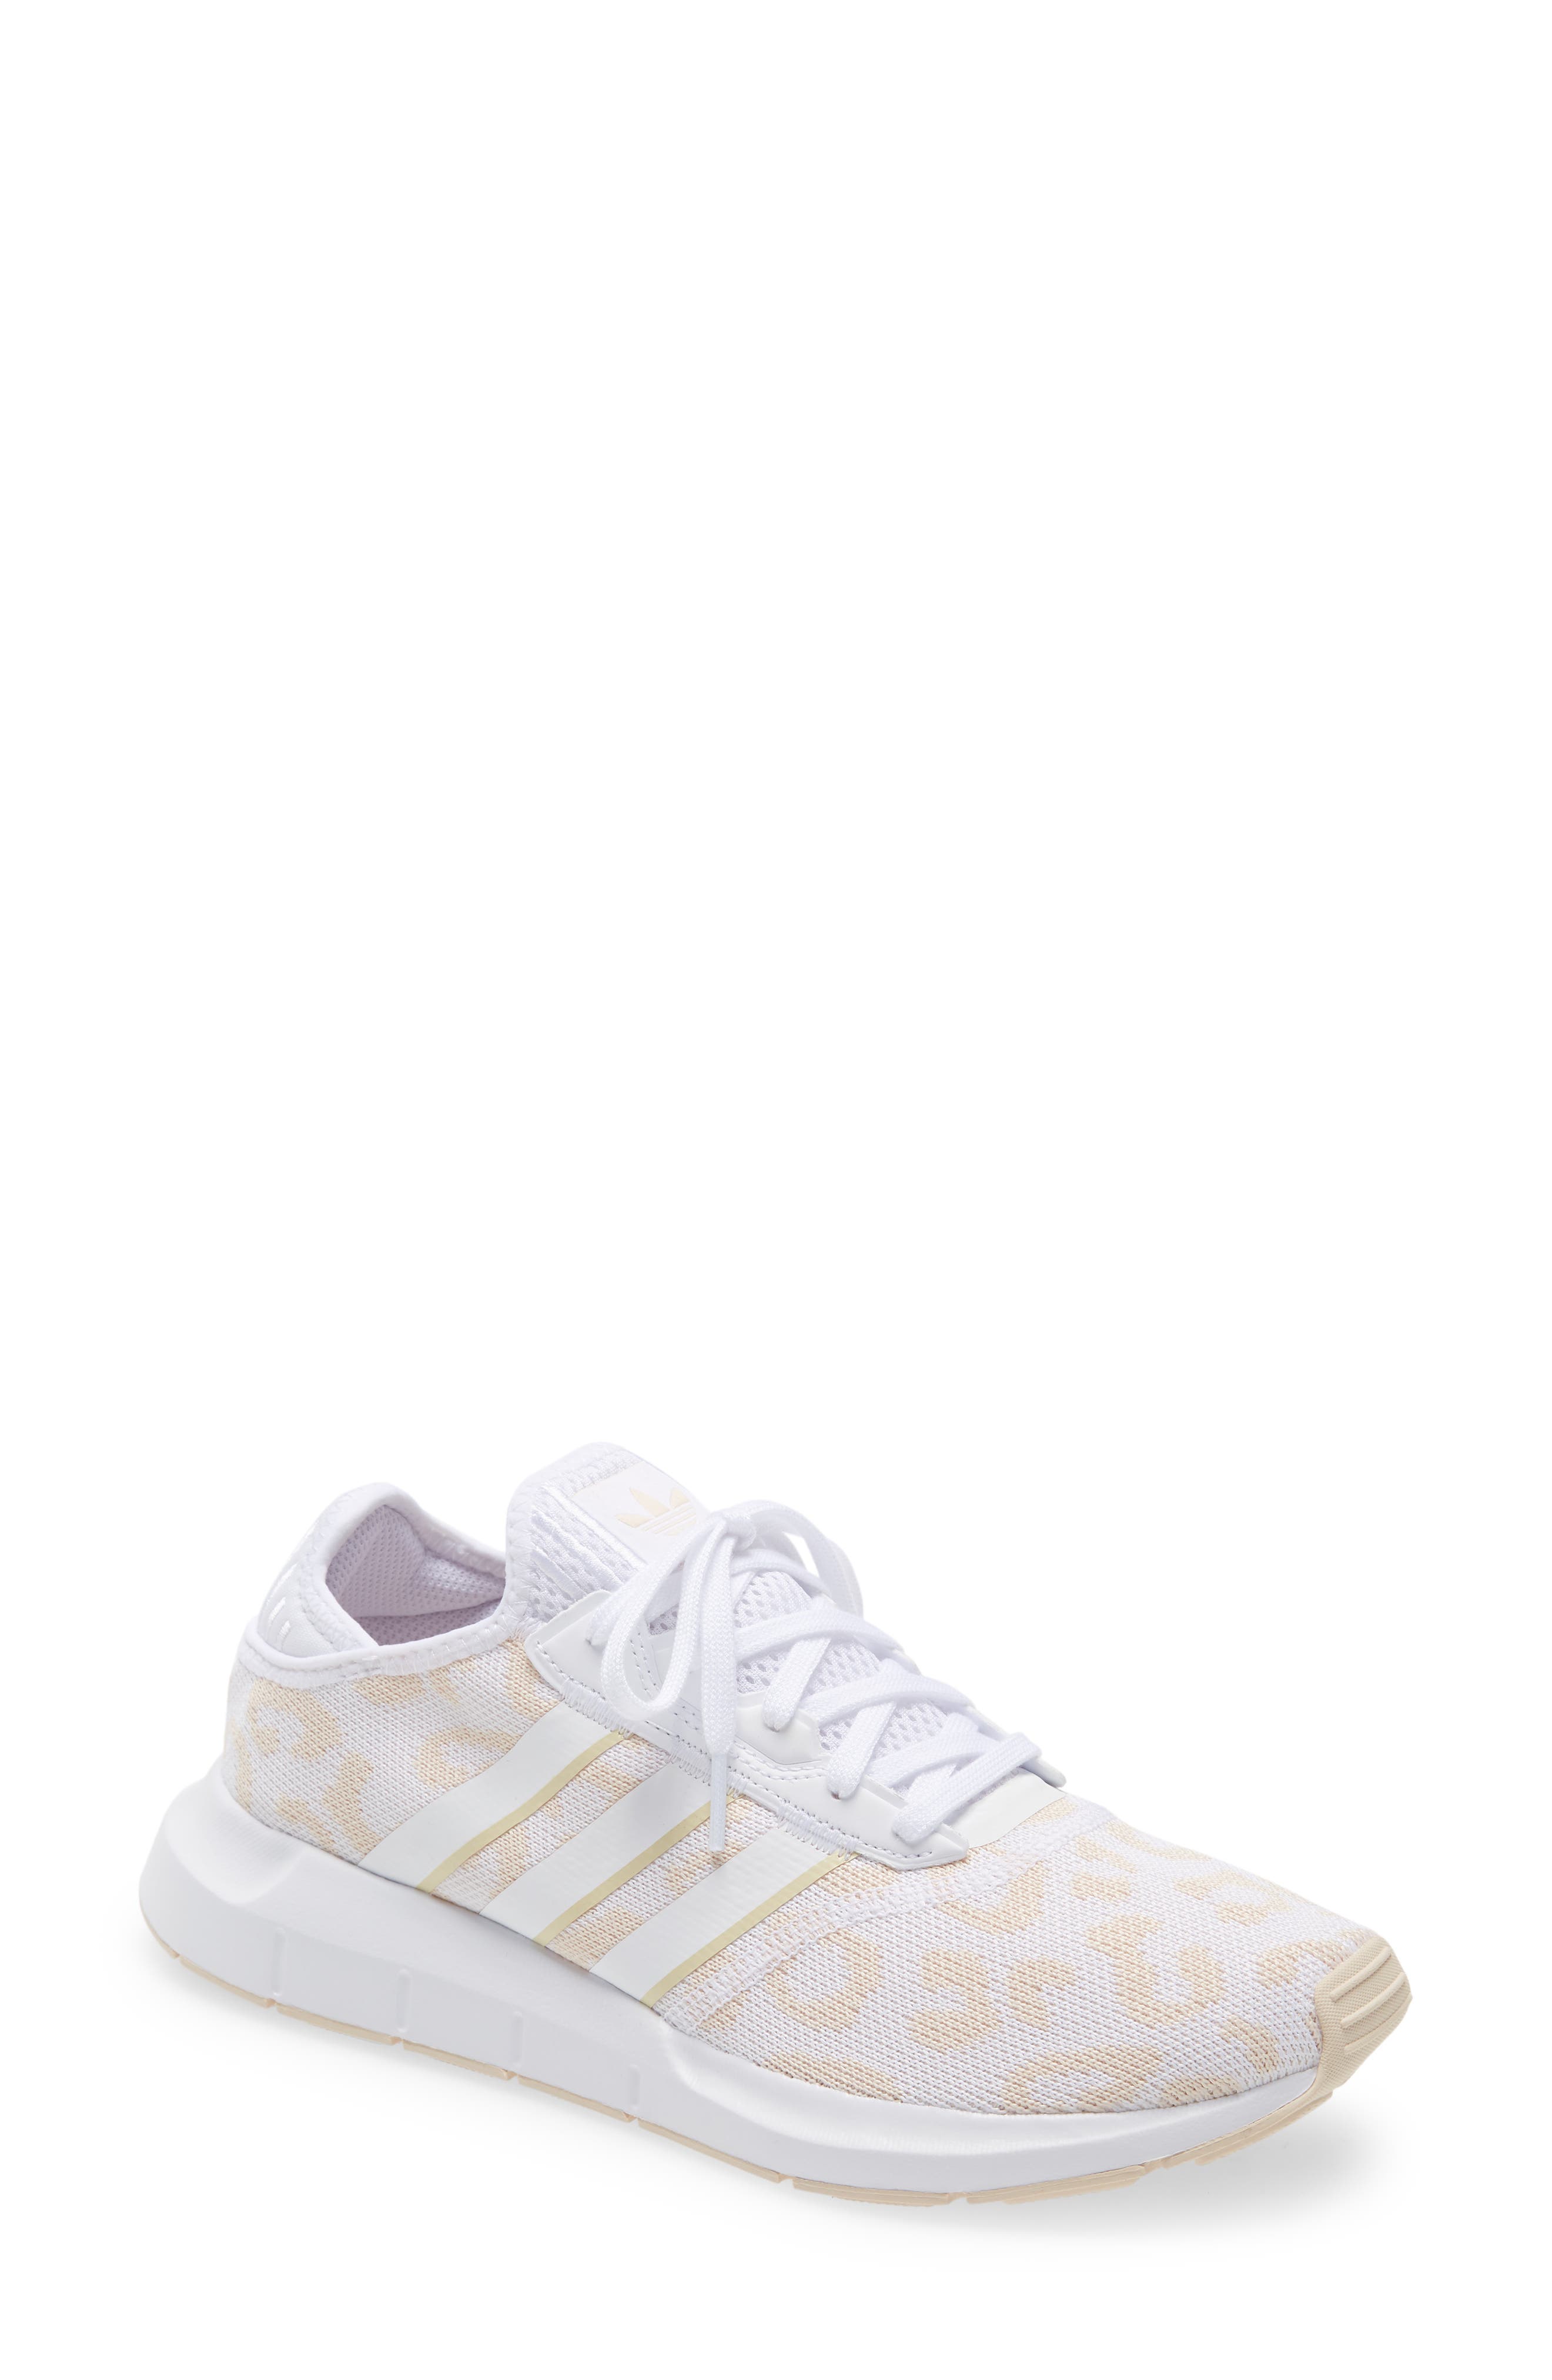 UPC 194811082918 product image for adidas Swift Run X Sneaker, Size 8 in Halo Ivory/White at Nordstrom | upcitemdb.com